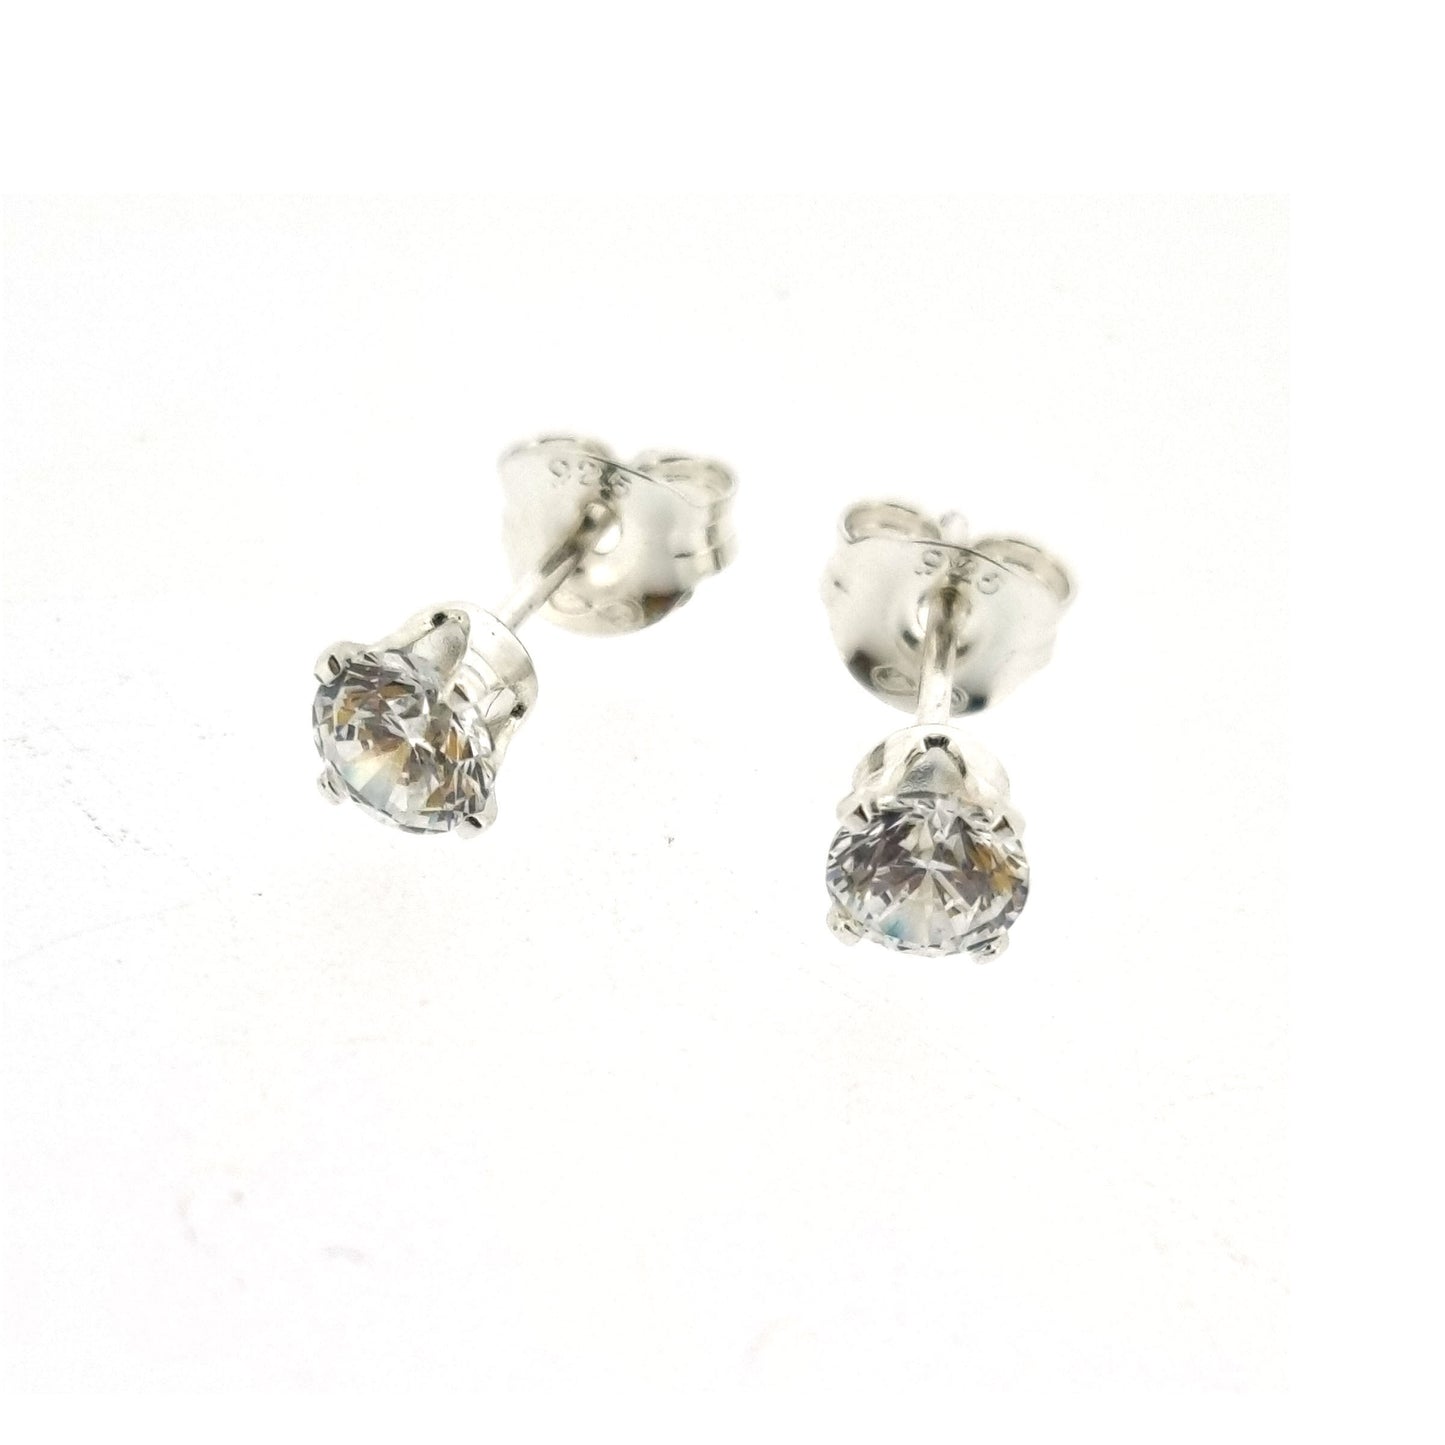 Silver 4 claw stud earrings with CZ gemstones - 4mm